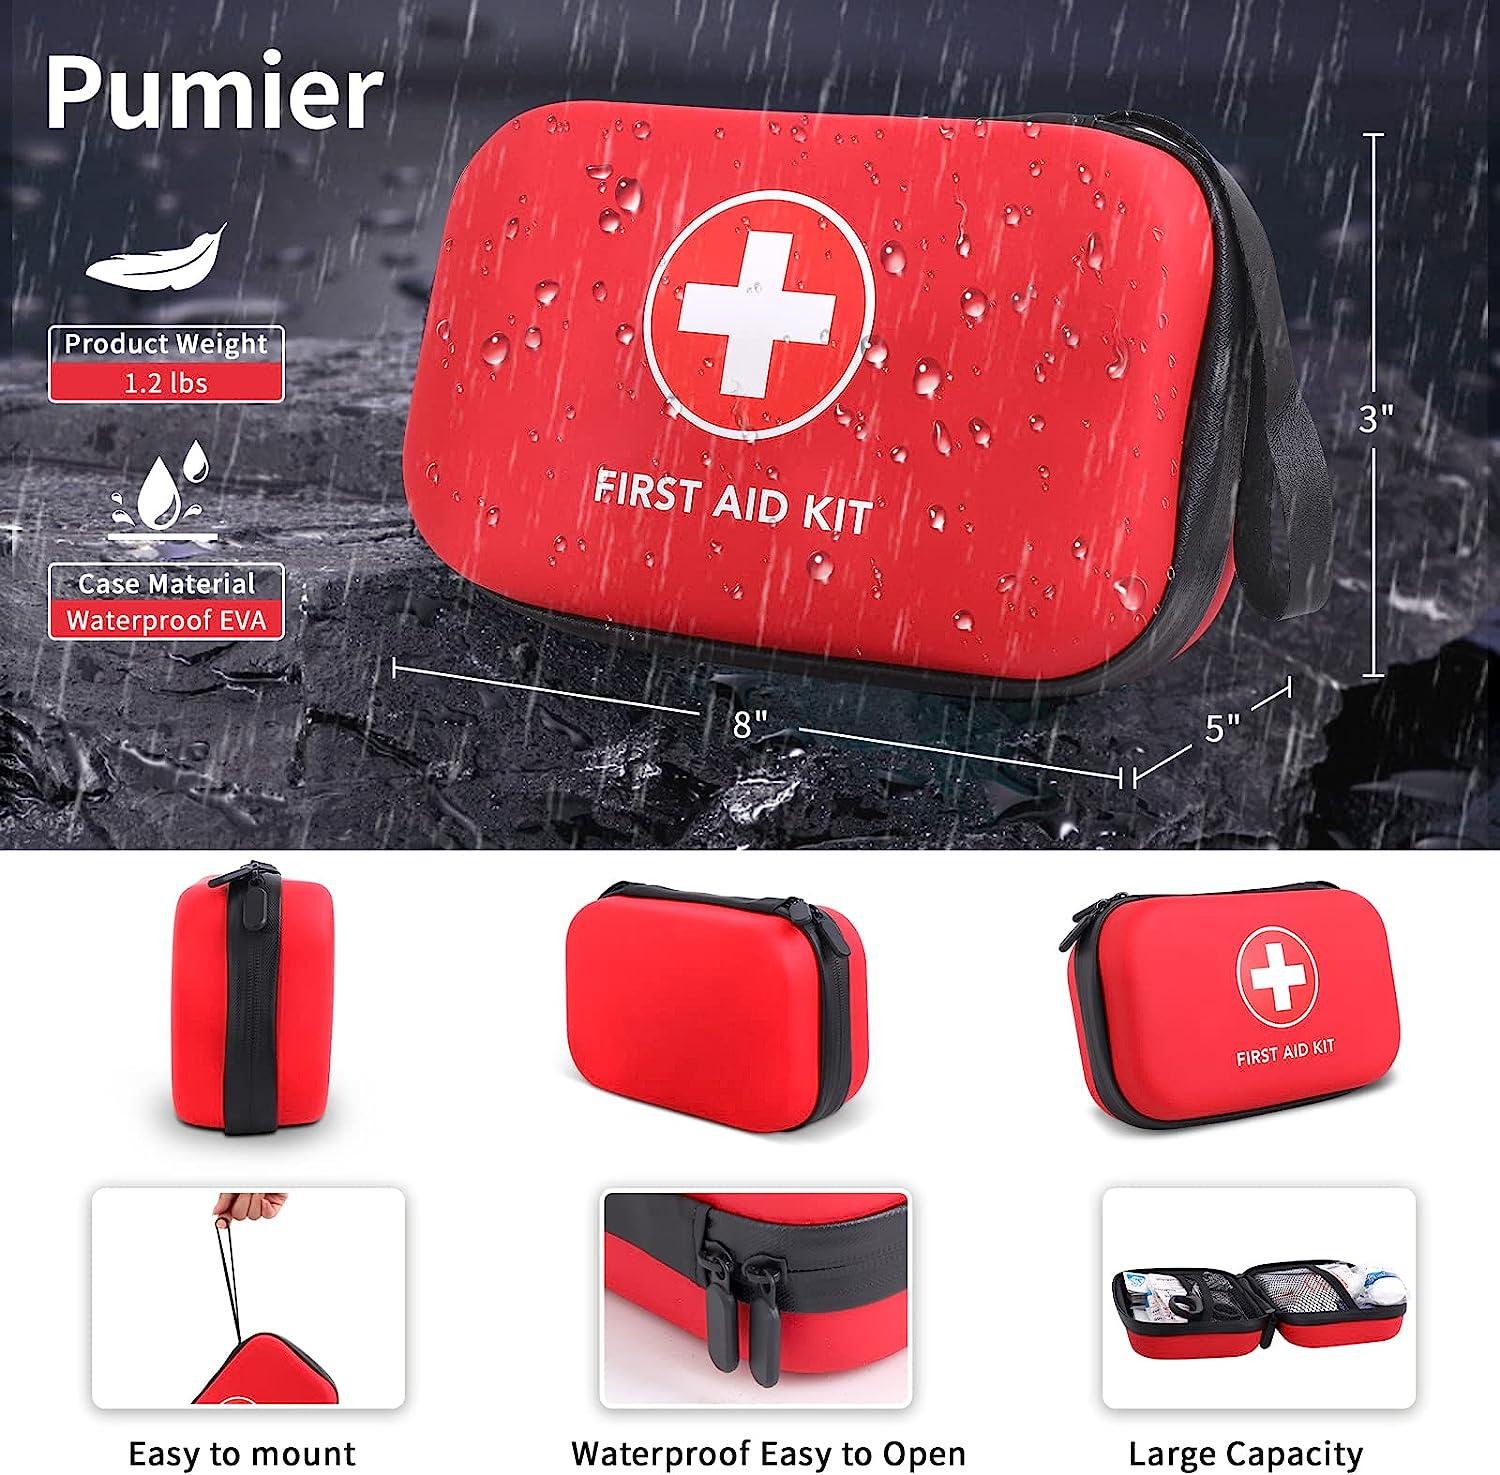 Home-Car-First-Aid-Kit-Camping-Essentials - 263pcs Waterproof Zippers is  Ideal for Travel, Office, Boat, Sports, Businesses, Hiking, Emergency  Survival (PUMIER)